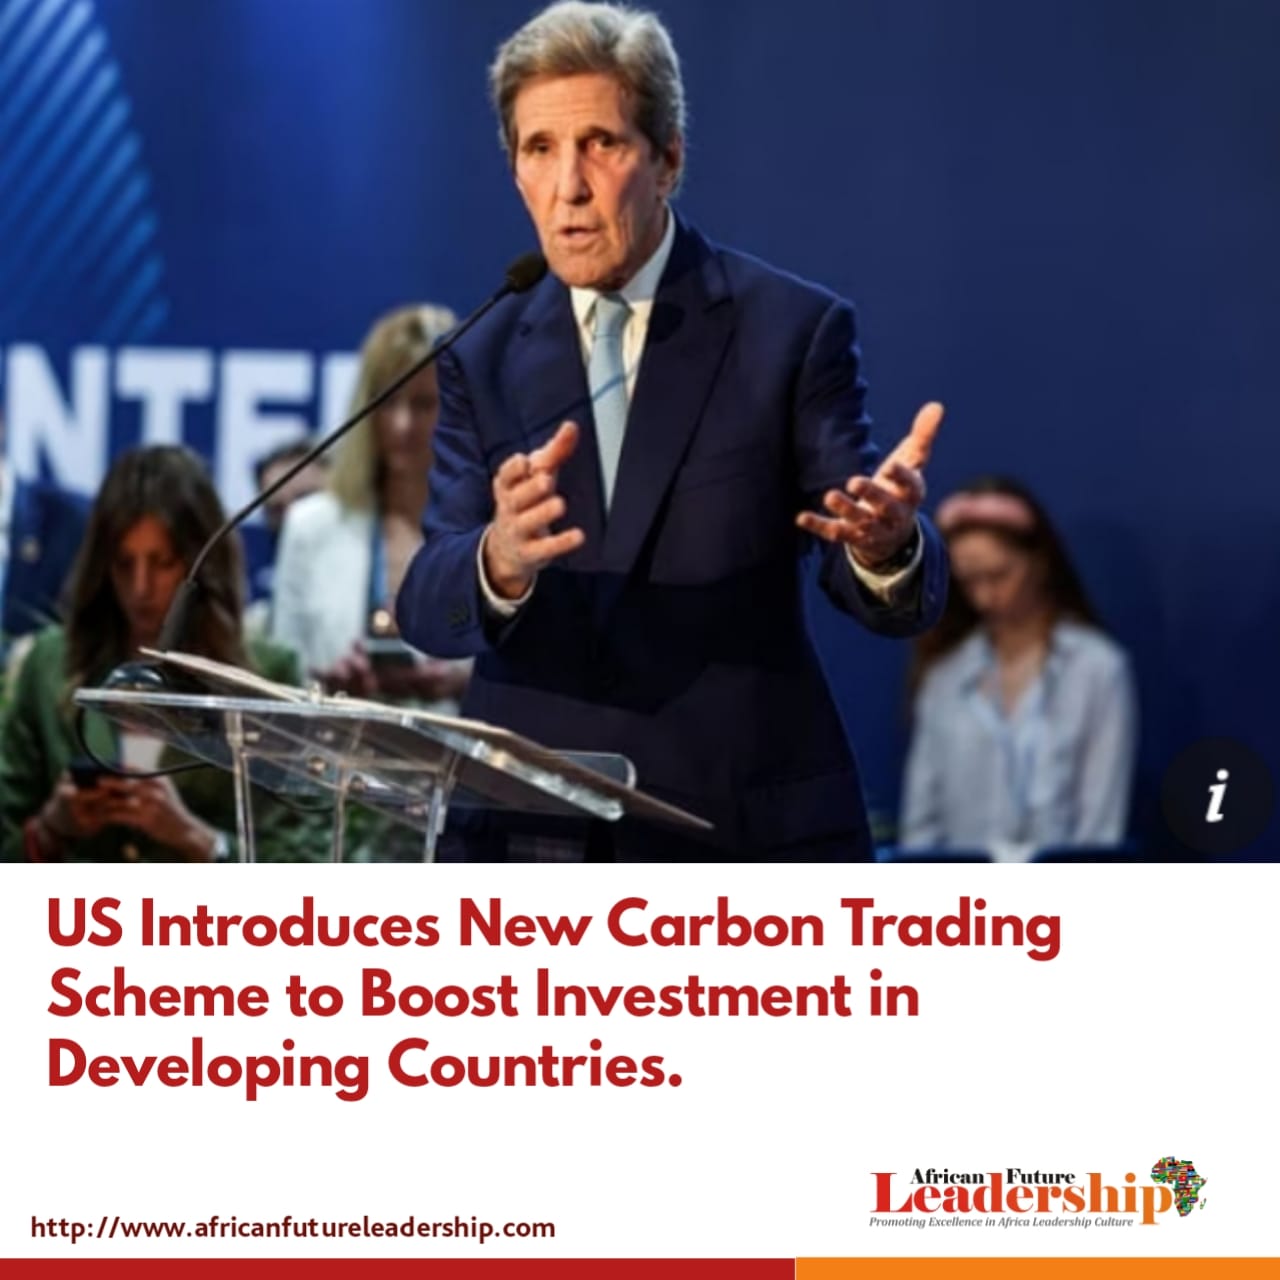 US Introduces New Carbon Trading Scheme to Boost Investment in Developing Countries